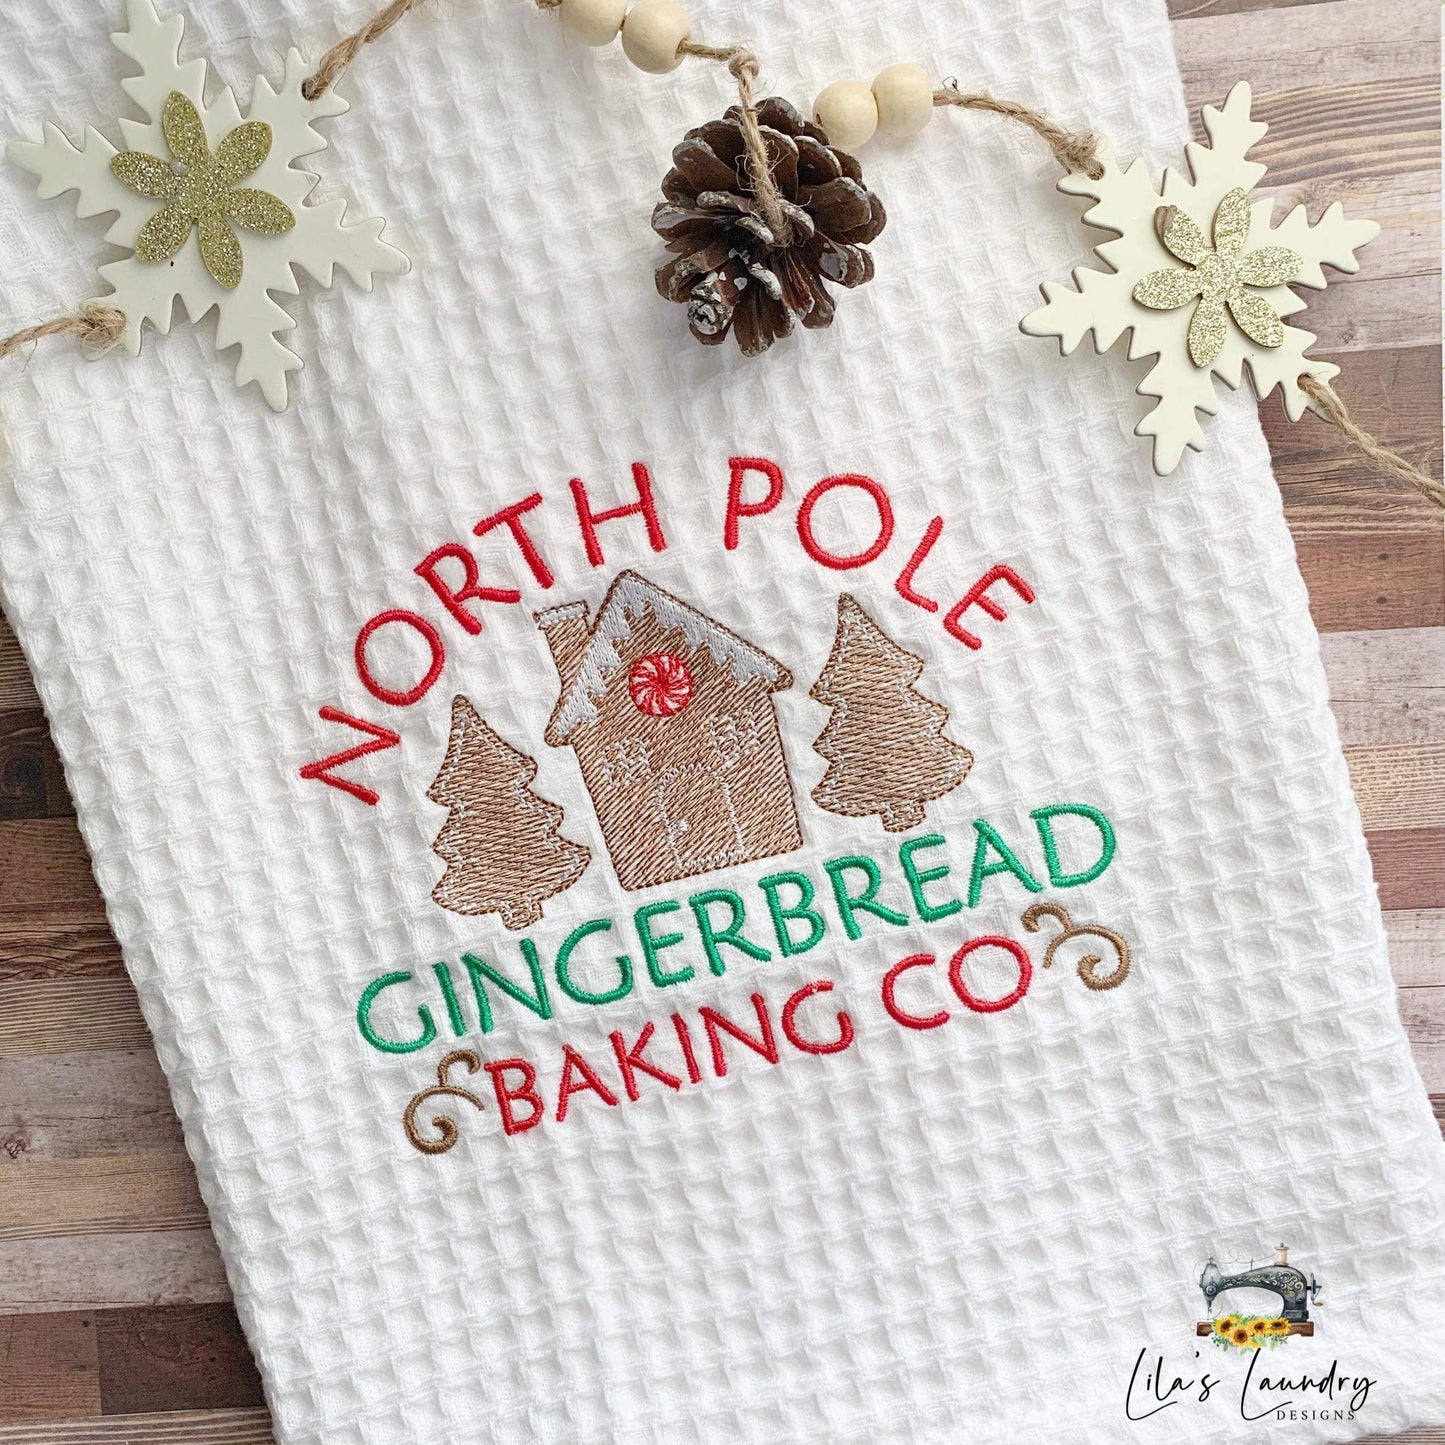 Gingerbread Baking Co - 3 sizes- Digital Embroidery Design